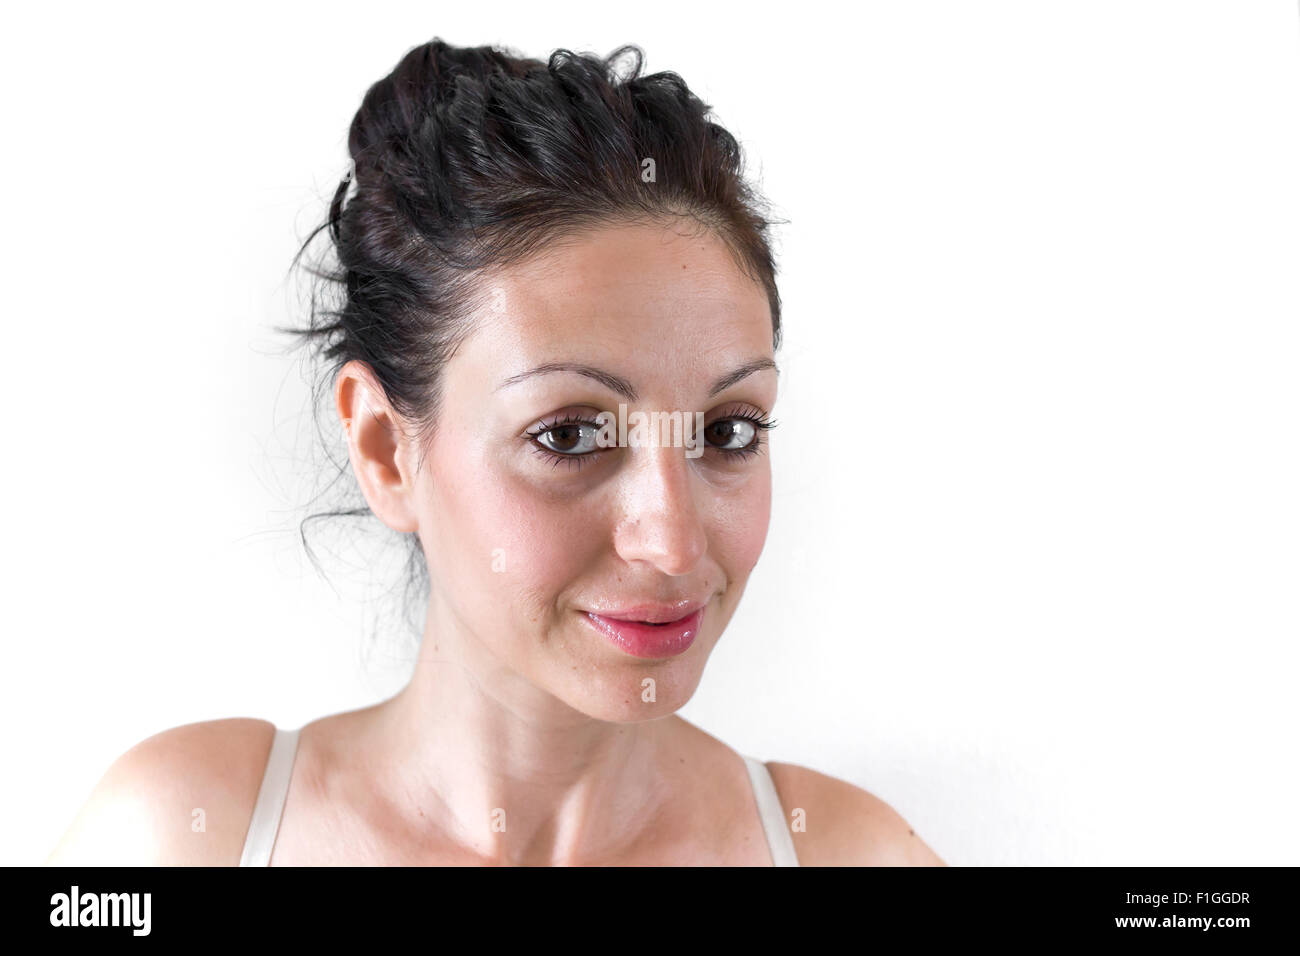 Close up of the face of a young woman with light skin and natural tones. Stock Photo